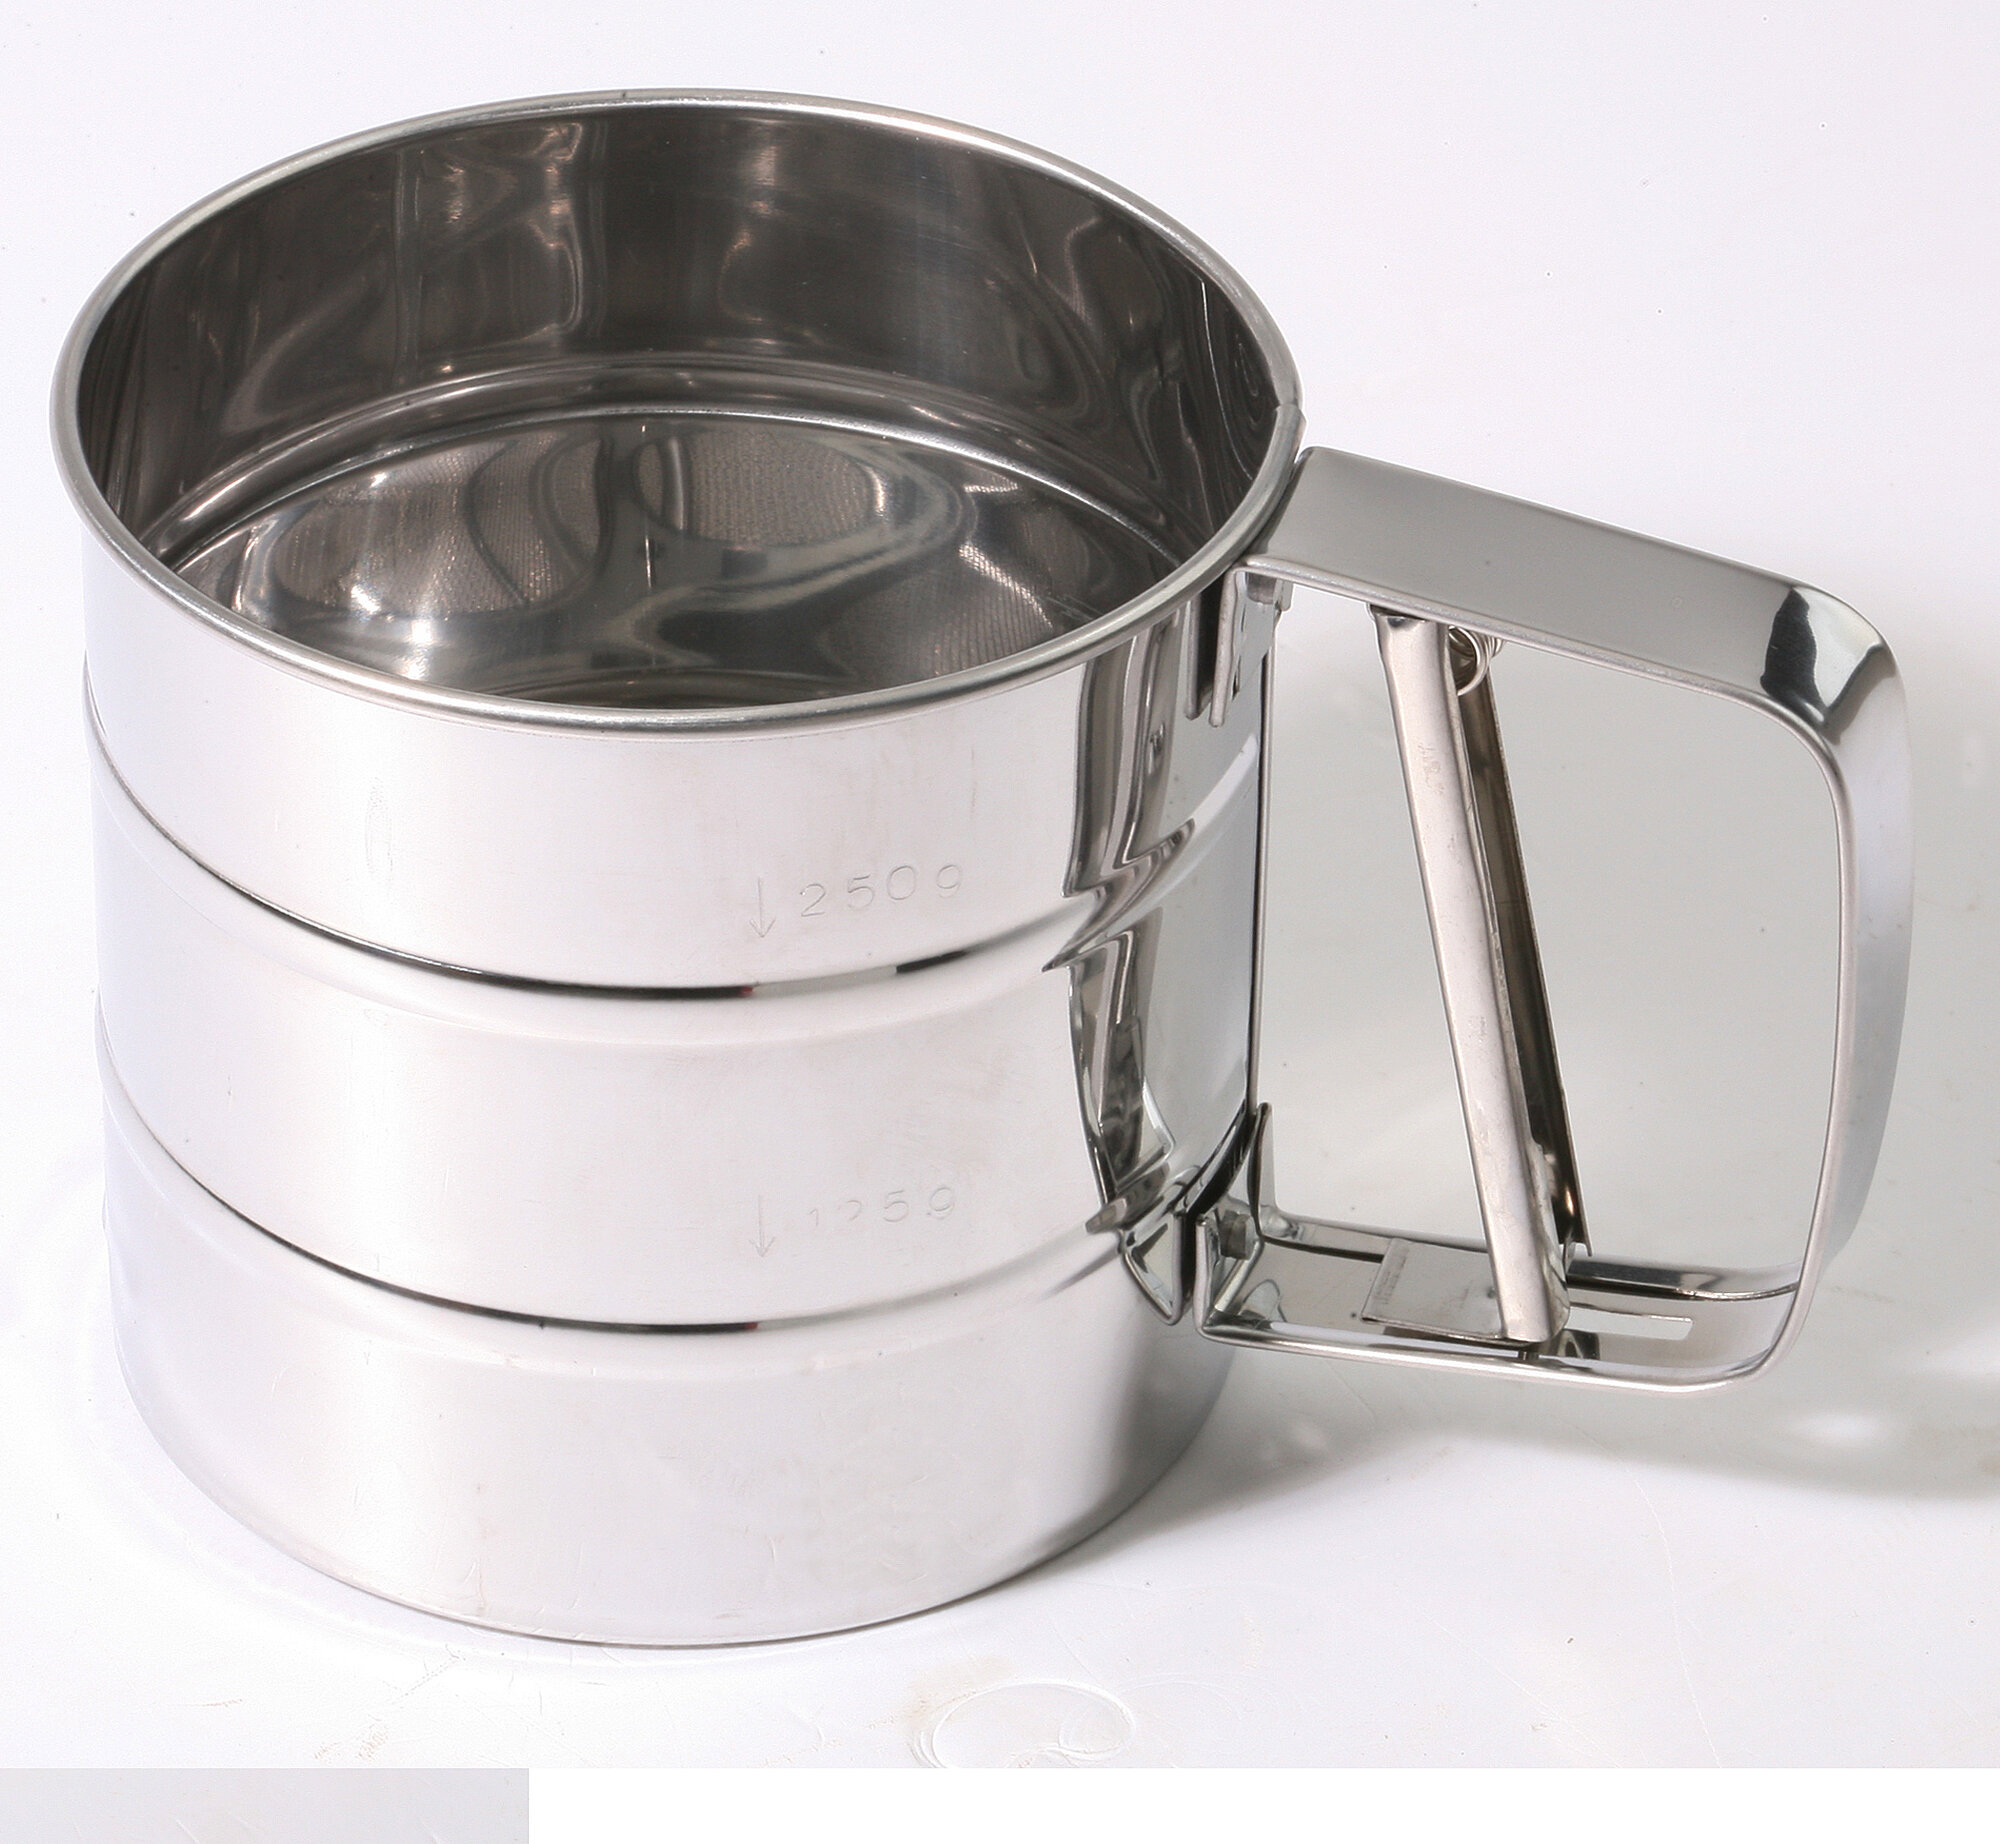 Culinary Edge 3 Cup Stainless Steel Flour Sifter | eBay Stainless Steel Flour Sifter Made In Usa